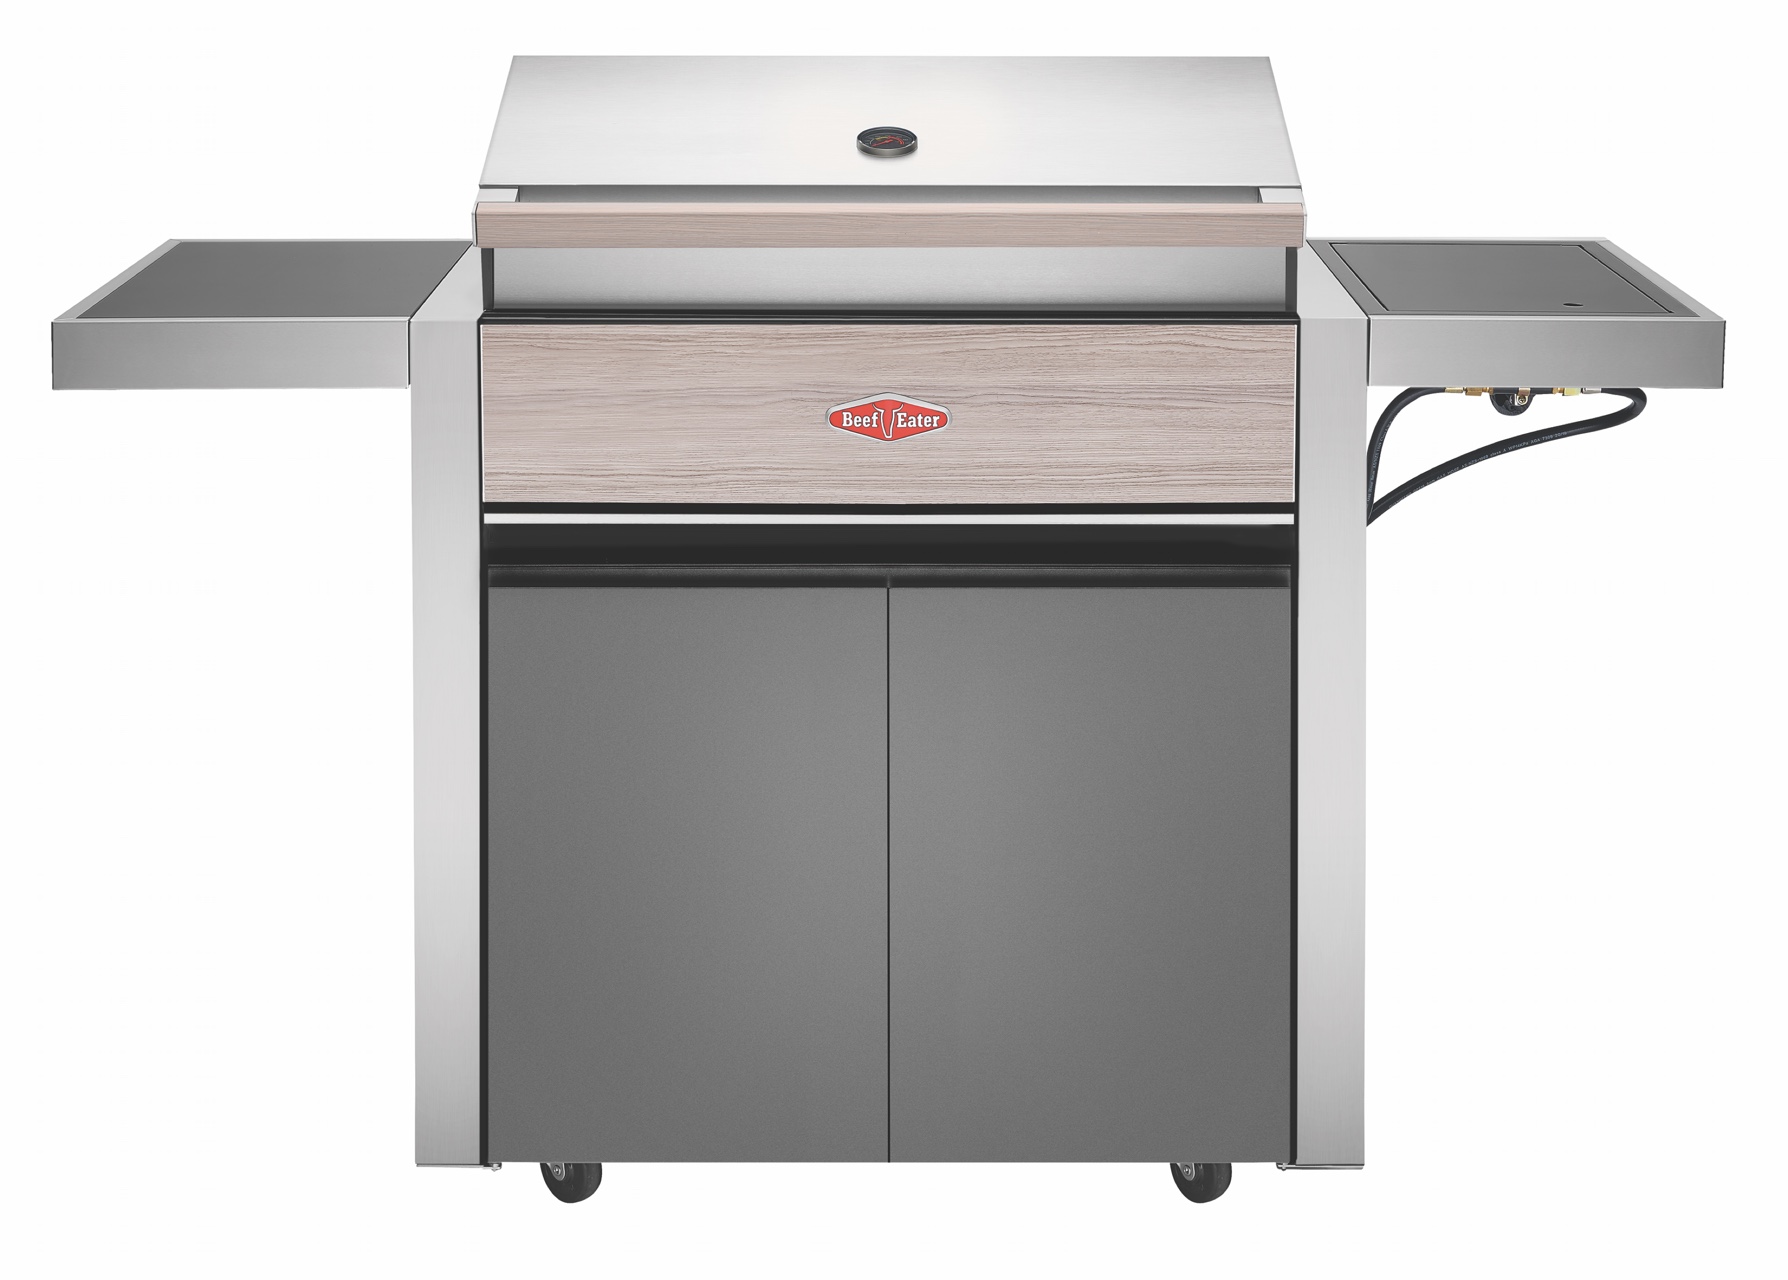 Beefeater 1500 Series - 4 burner grill carts